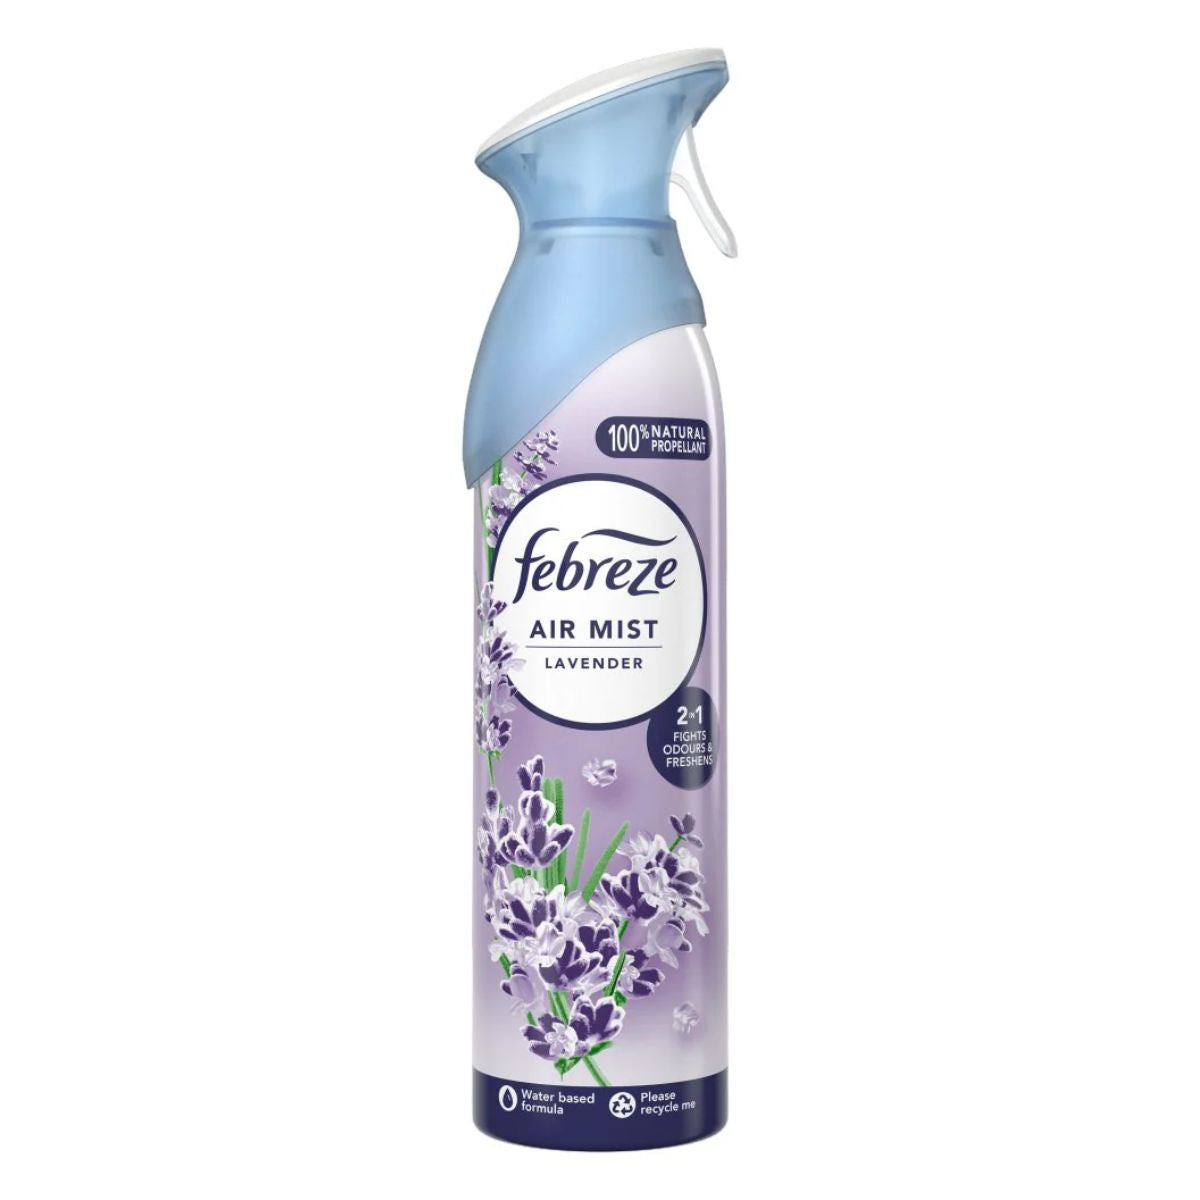 A bottle of Febreze - Air Freshener Spray Lavender - 185ml, featuring a spray nozzle and purple floral design.